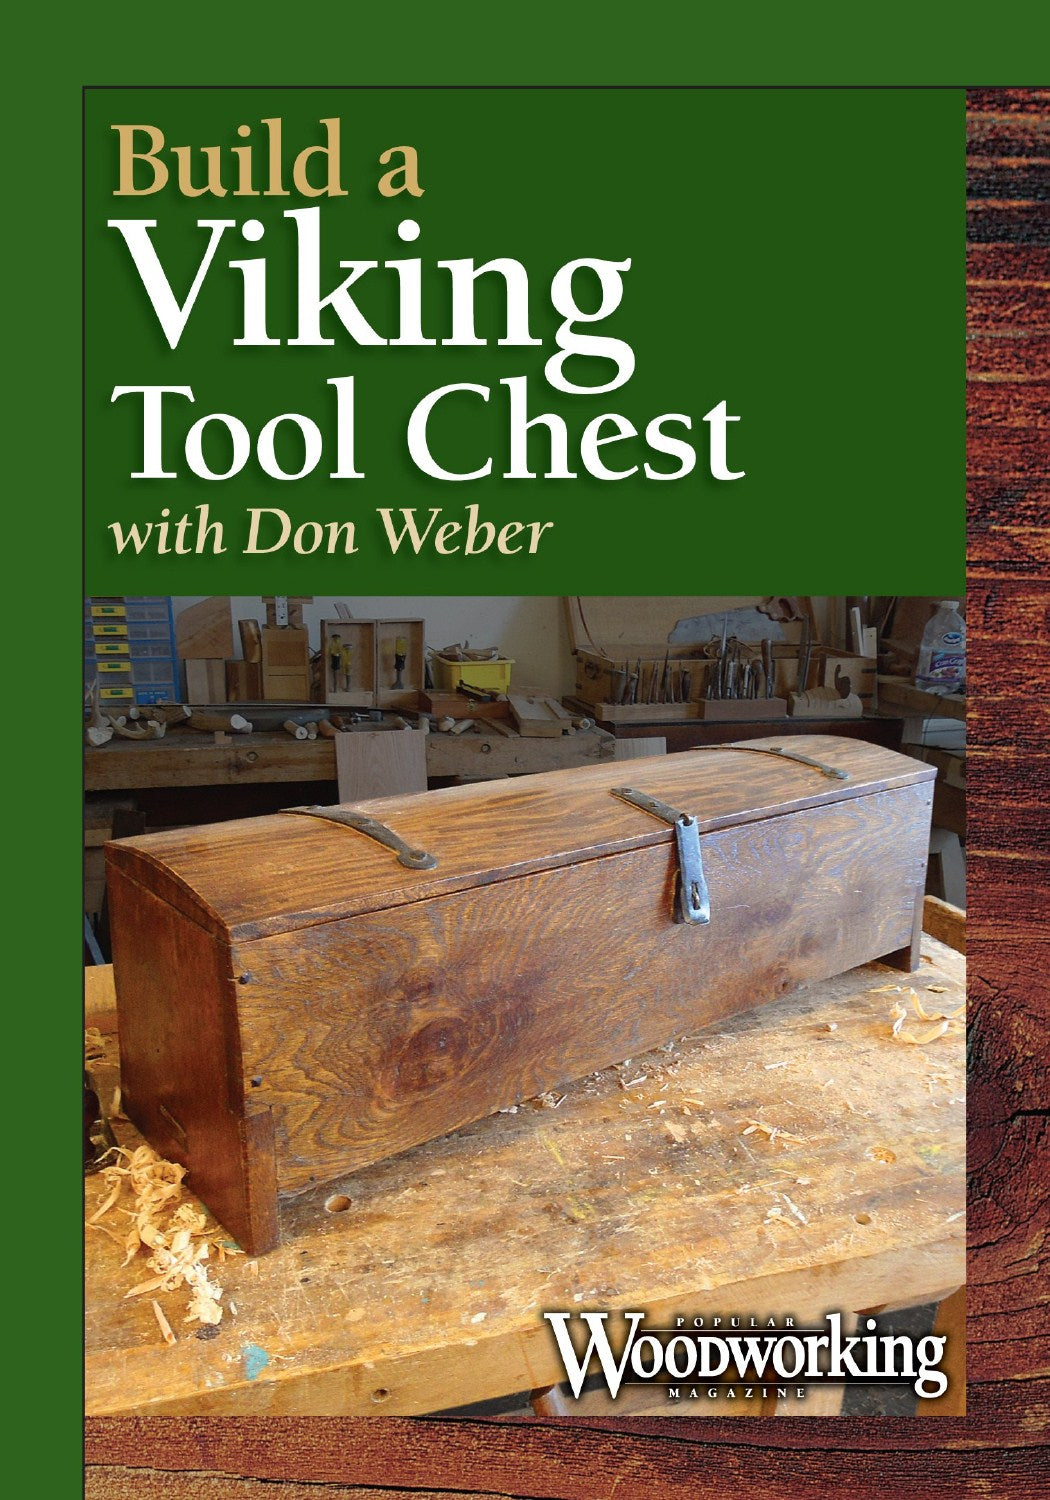 Build a Viking Tool Chest with Don Weber Video Download